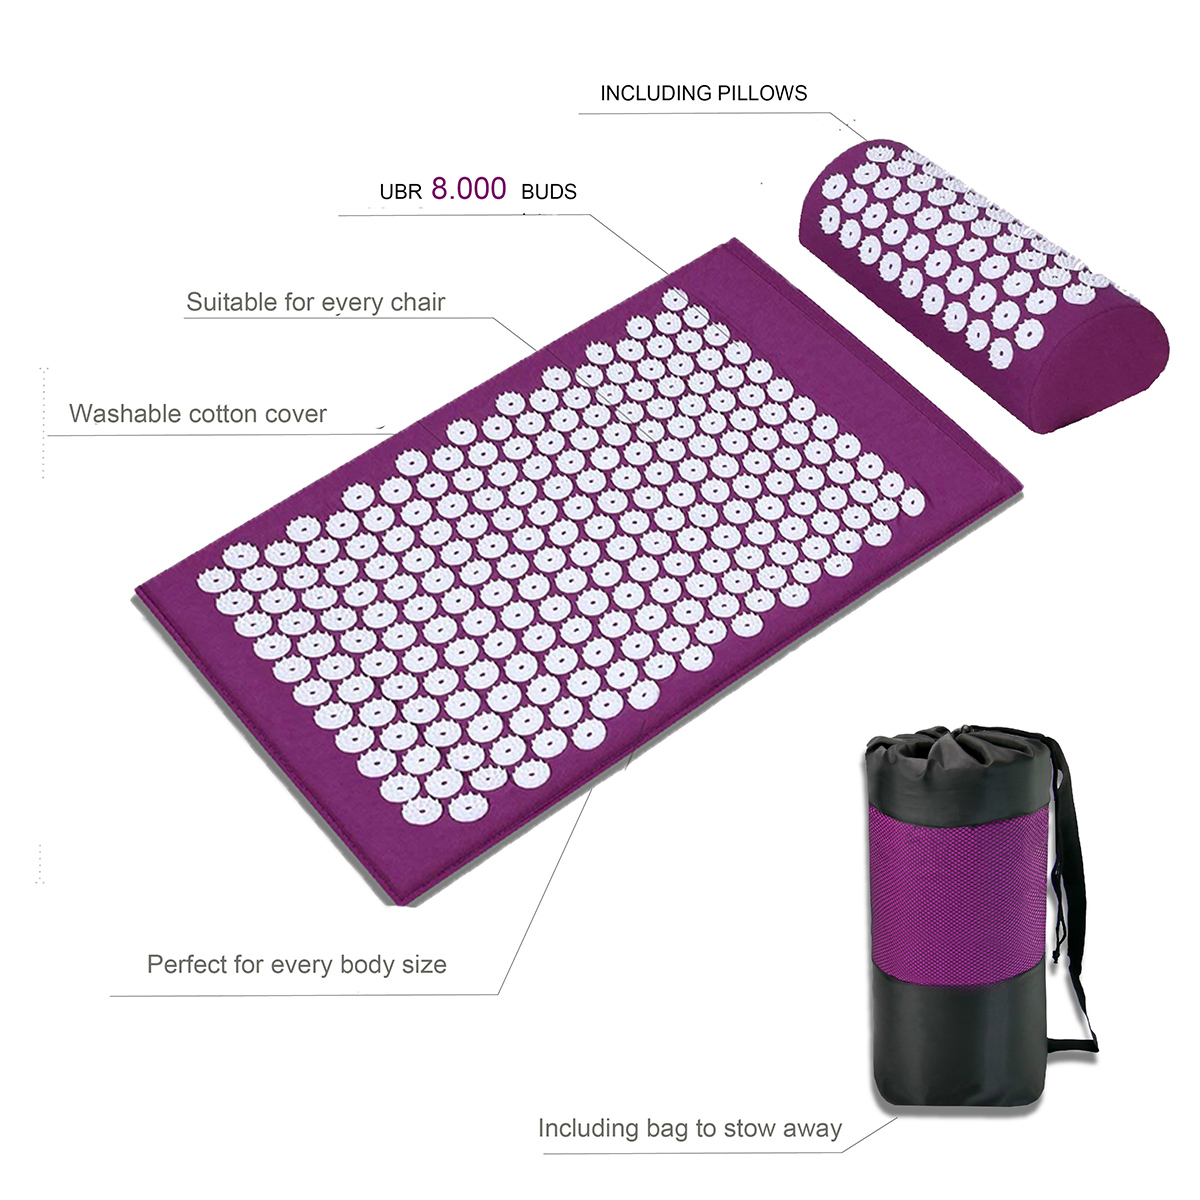 Carpets Acupressure Mat Massage Relieve Stress Back Body Pain Spike Cushion Yoga Acupuncture от DHgate WW